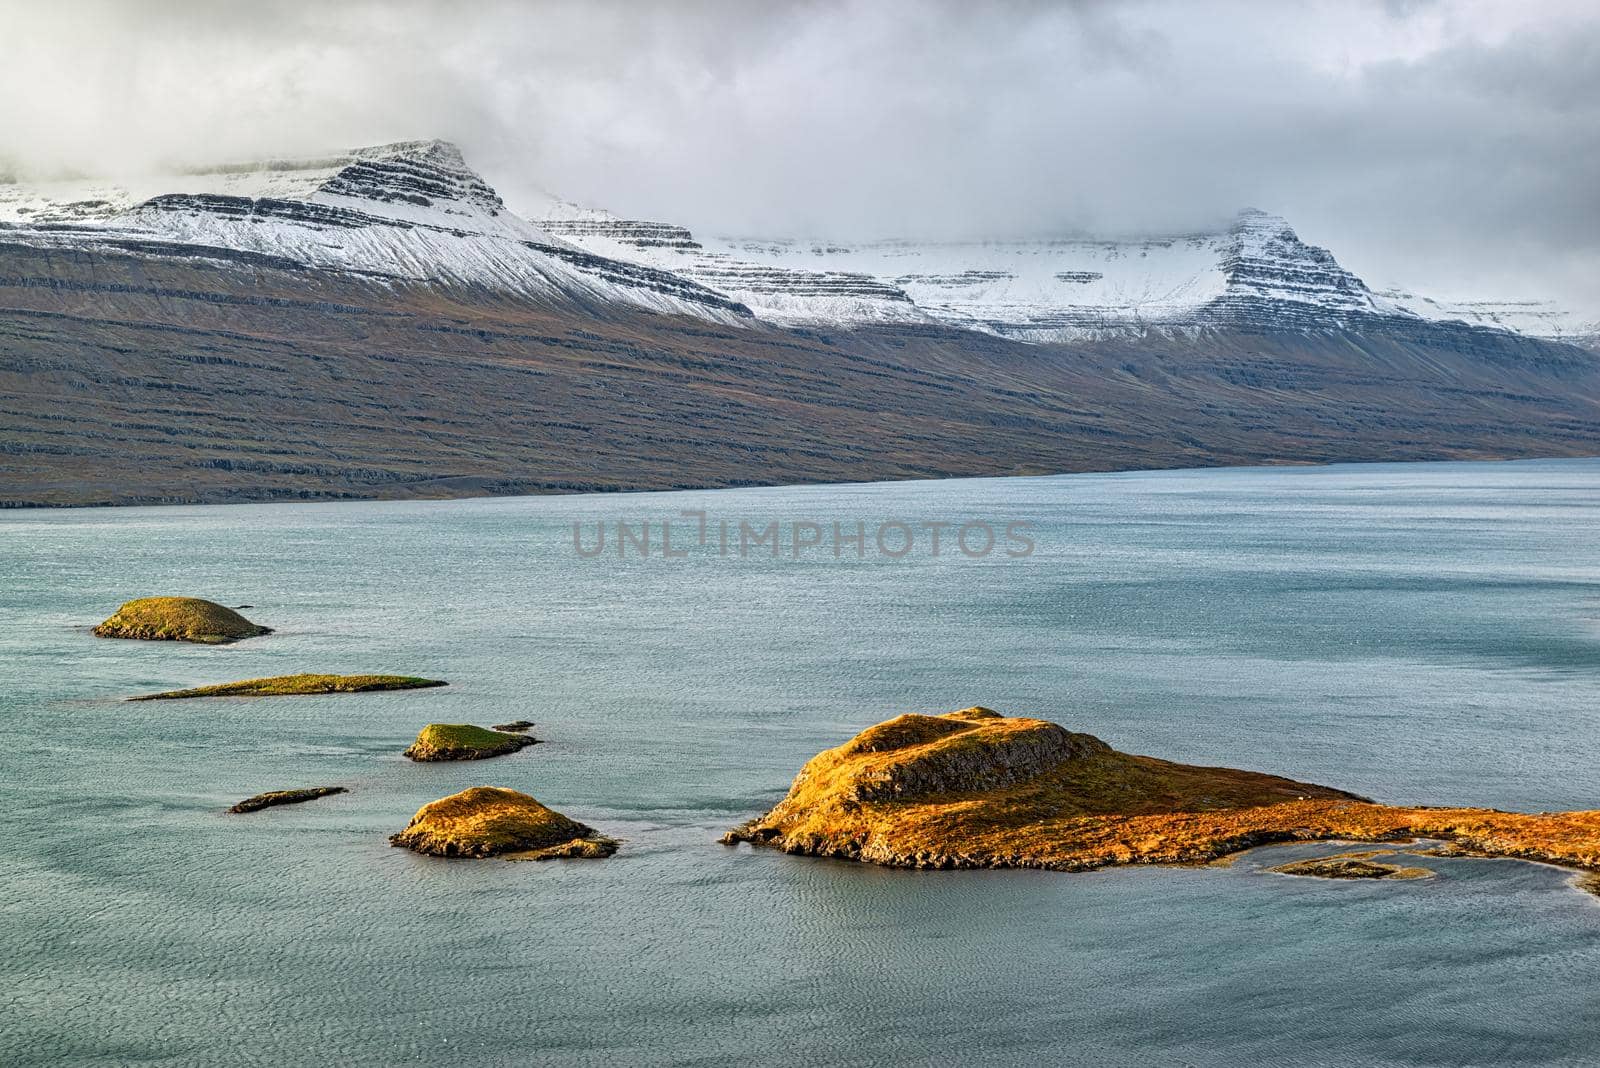 Eskifjordur on the east side of Iceland on a cloudy day